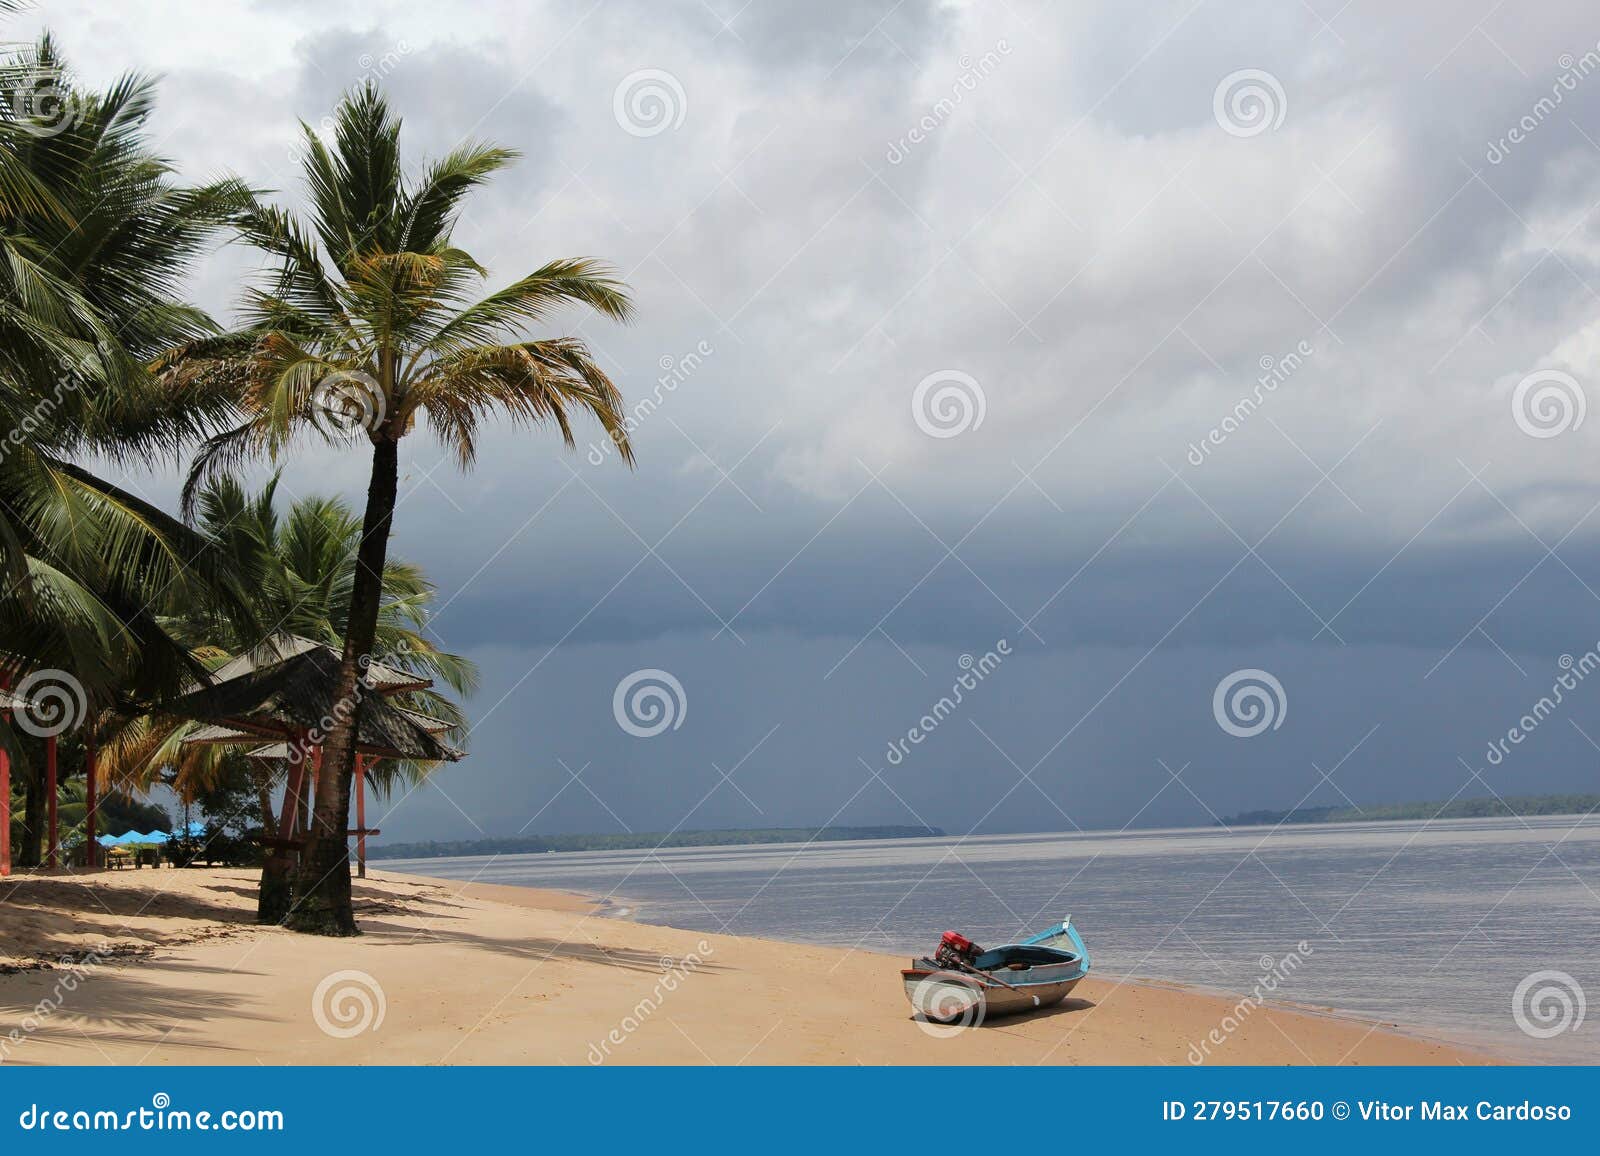 a lone boat rests on the sands of a river beach